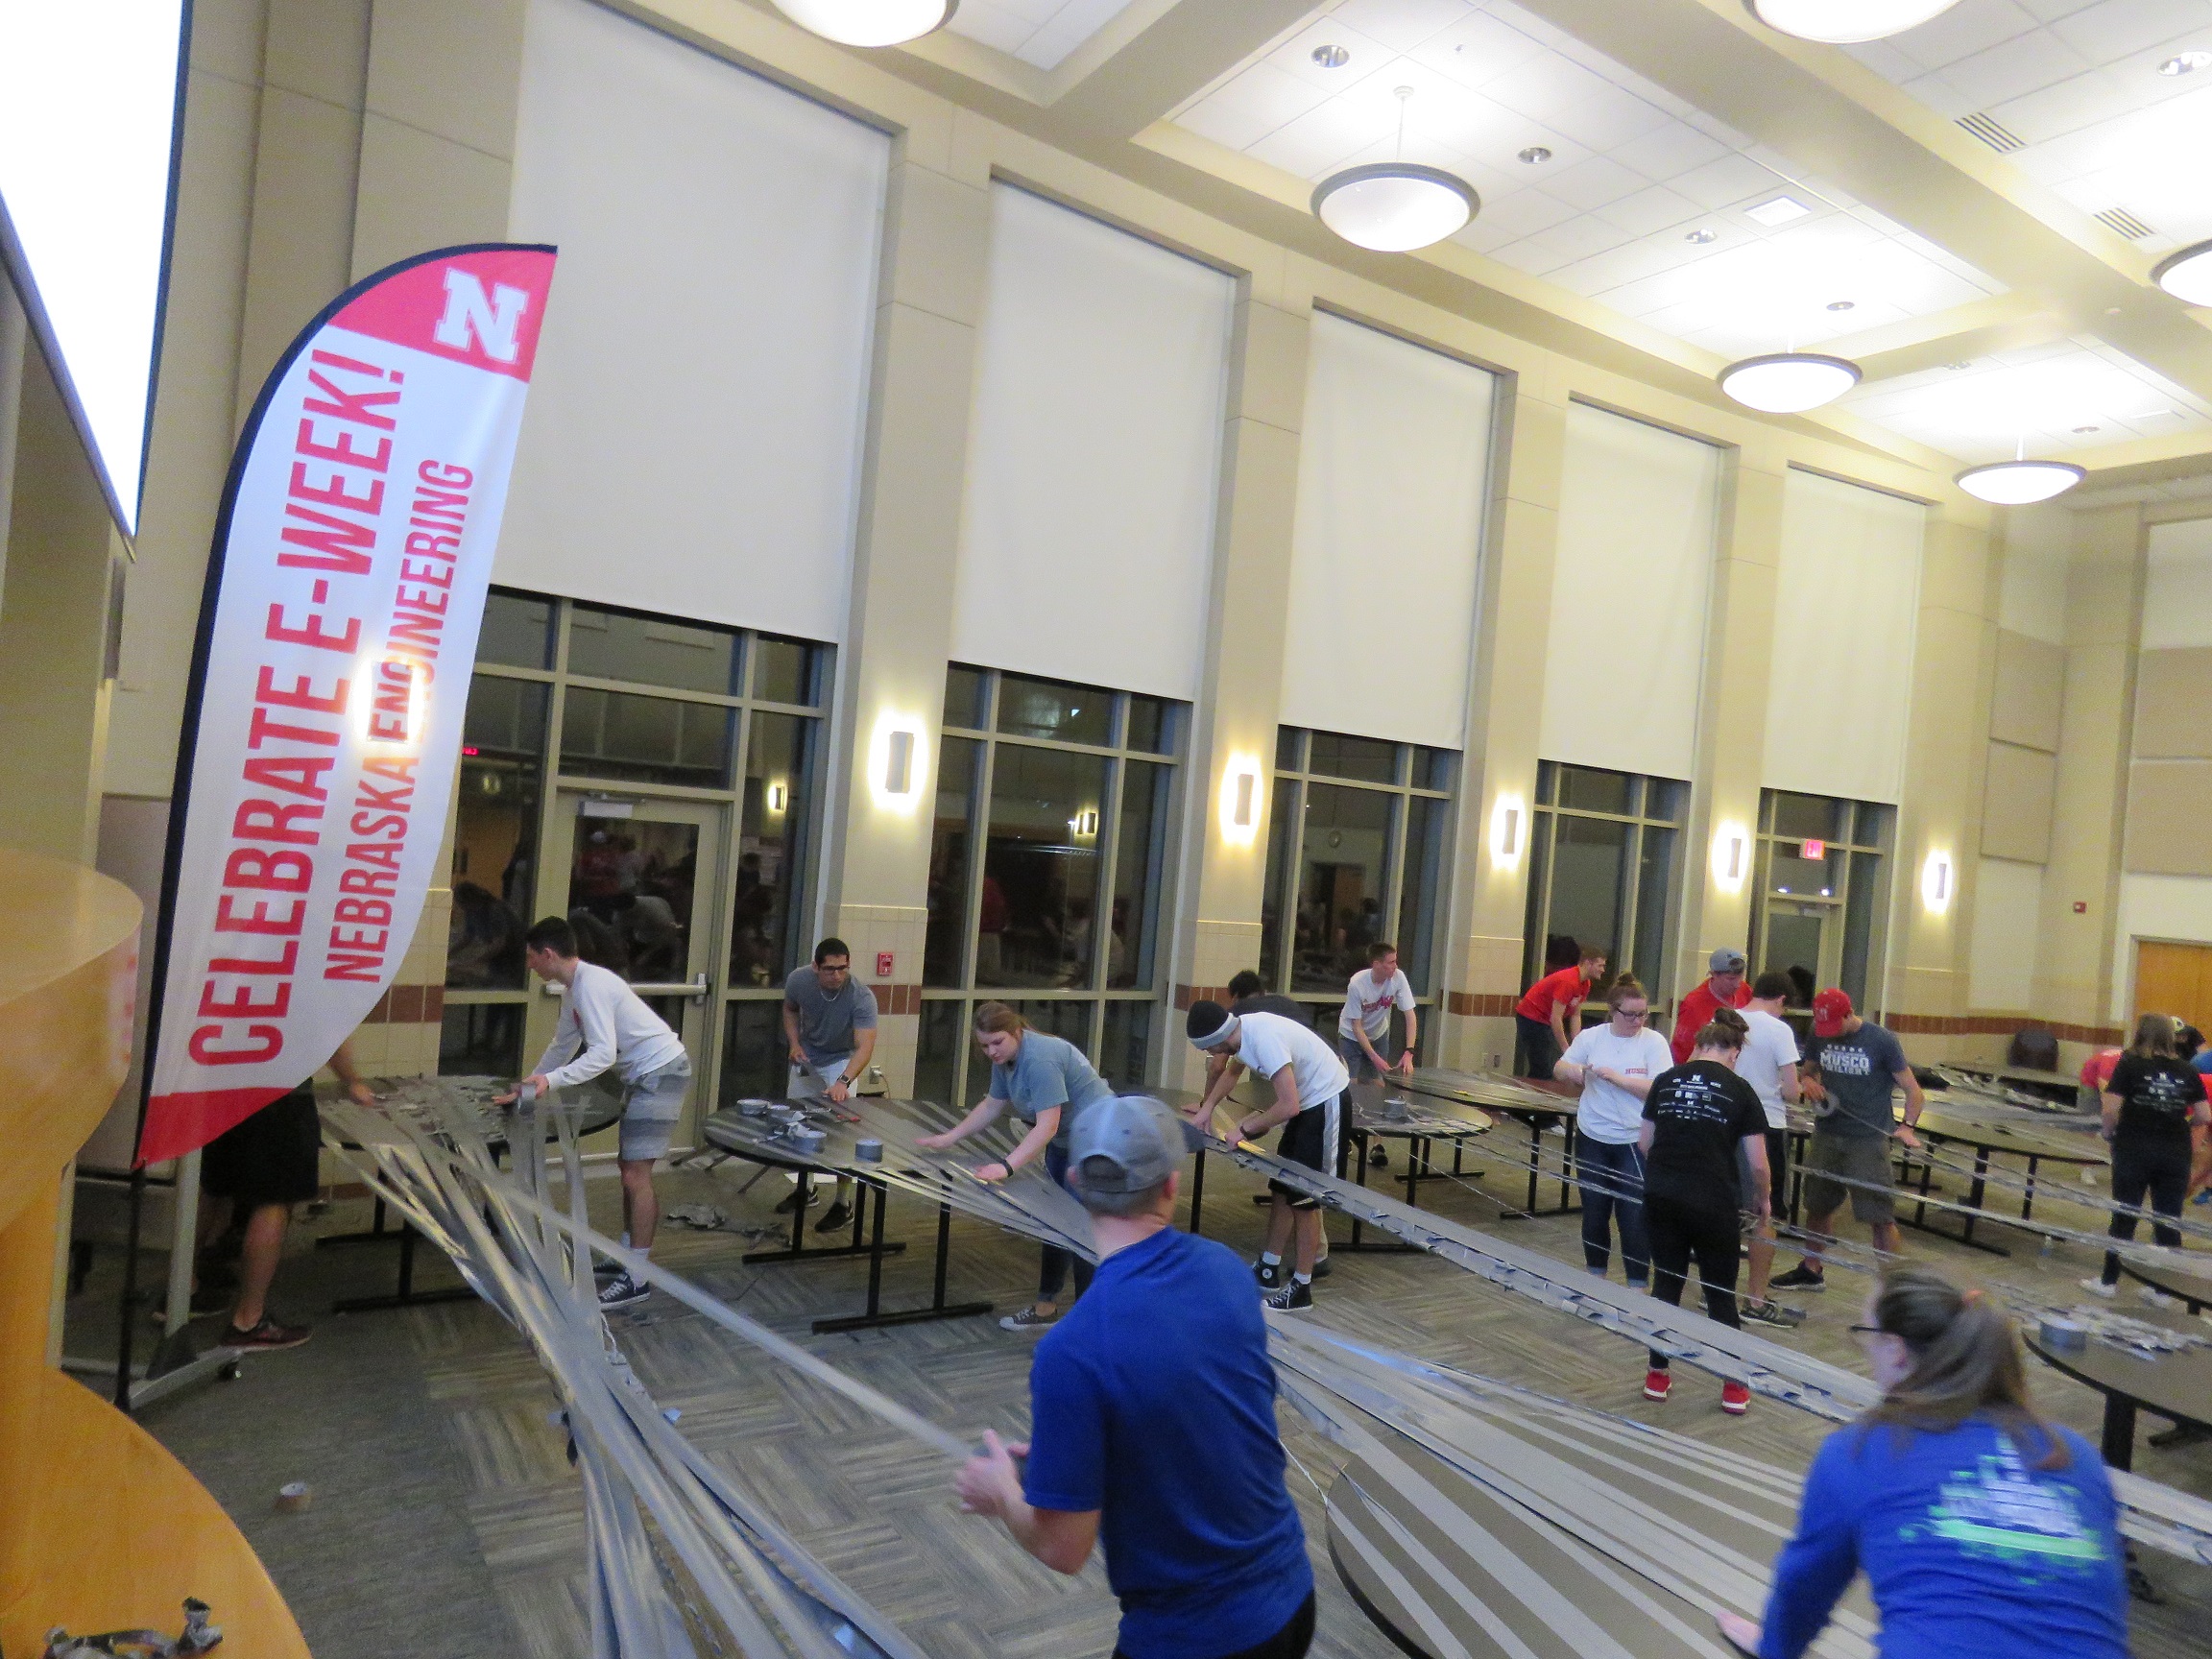 Students showcase their creativity and engineering skills at the design competition, trying to build the strongest duct tape bridges. Photo courtesy of the College of Engineering.